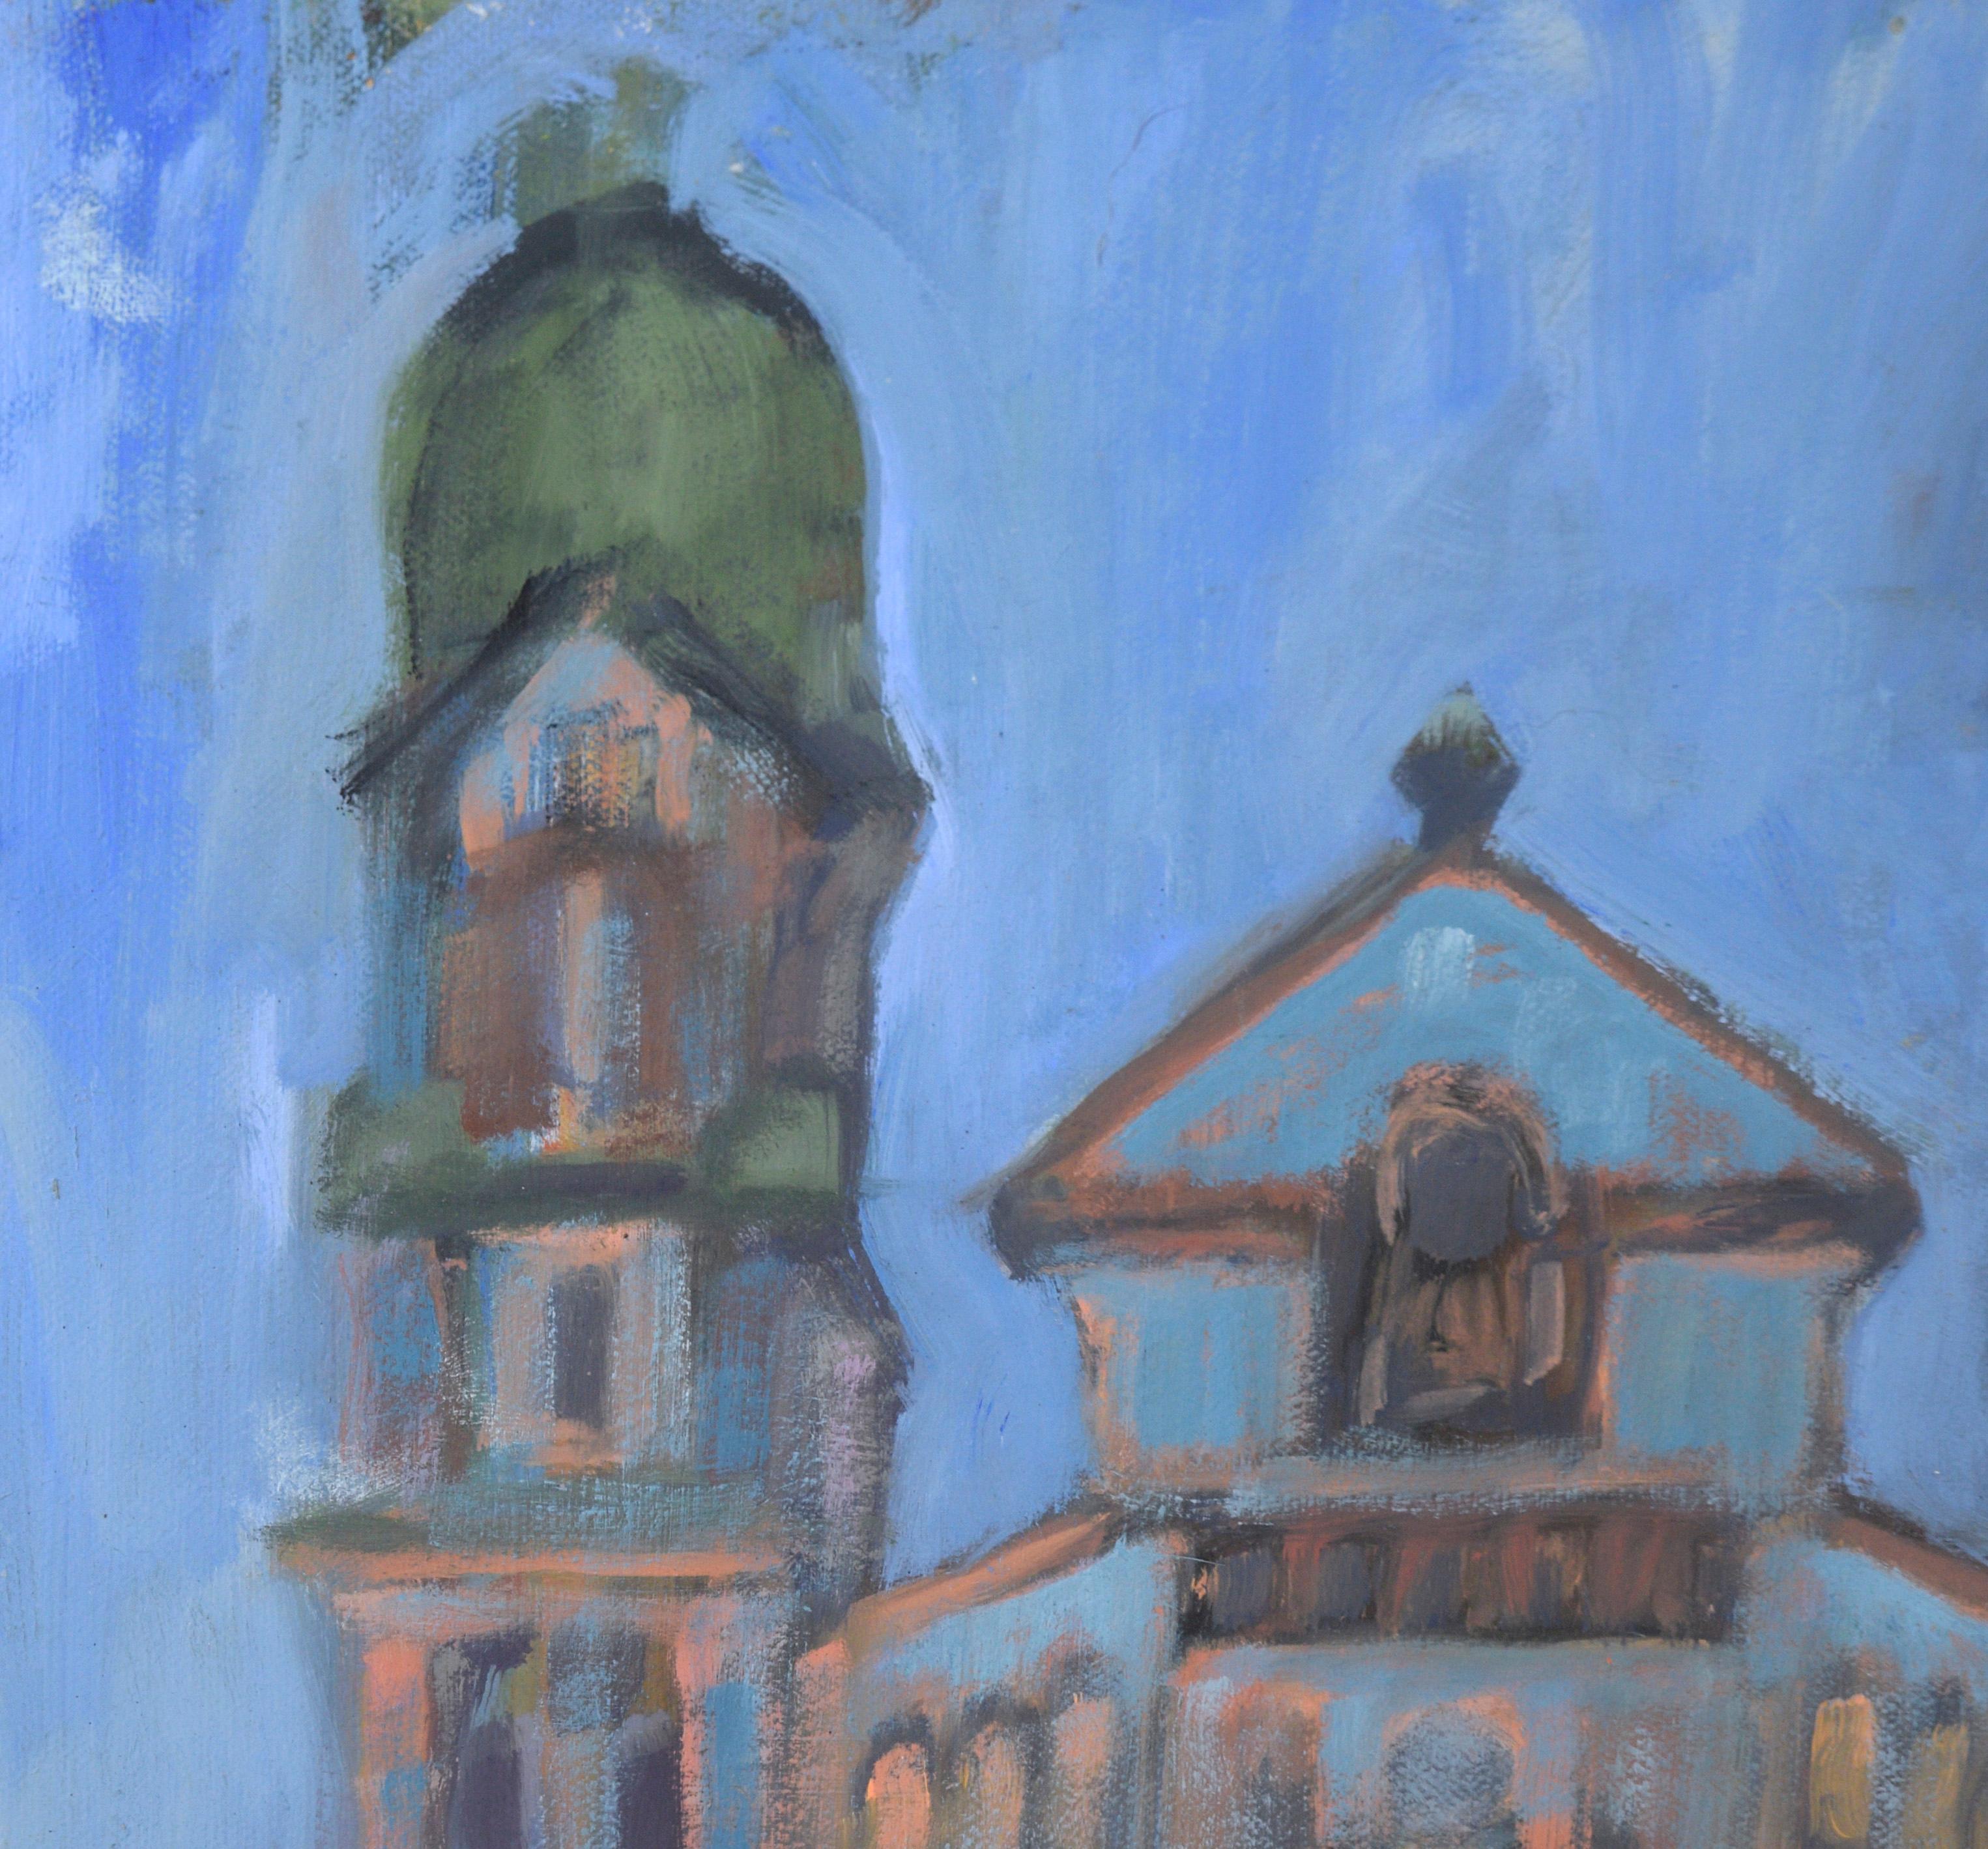 Cathedral with Green Domes in Acrylic on Masonite - Painting by M. Pavao